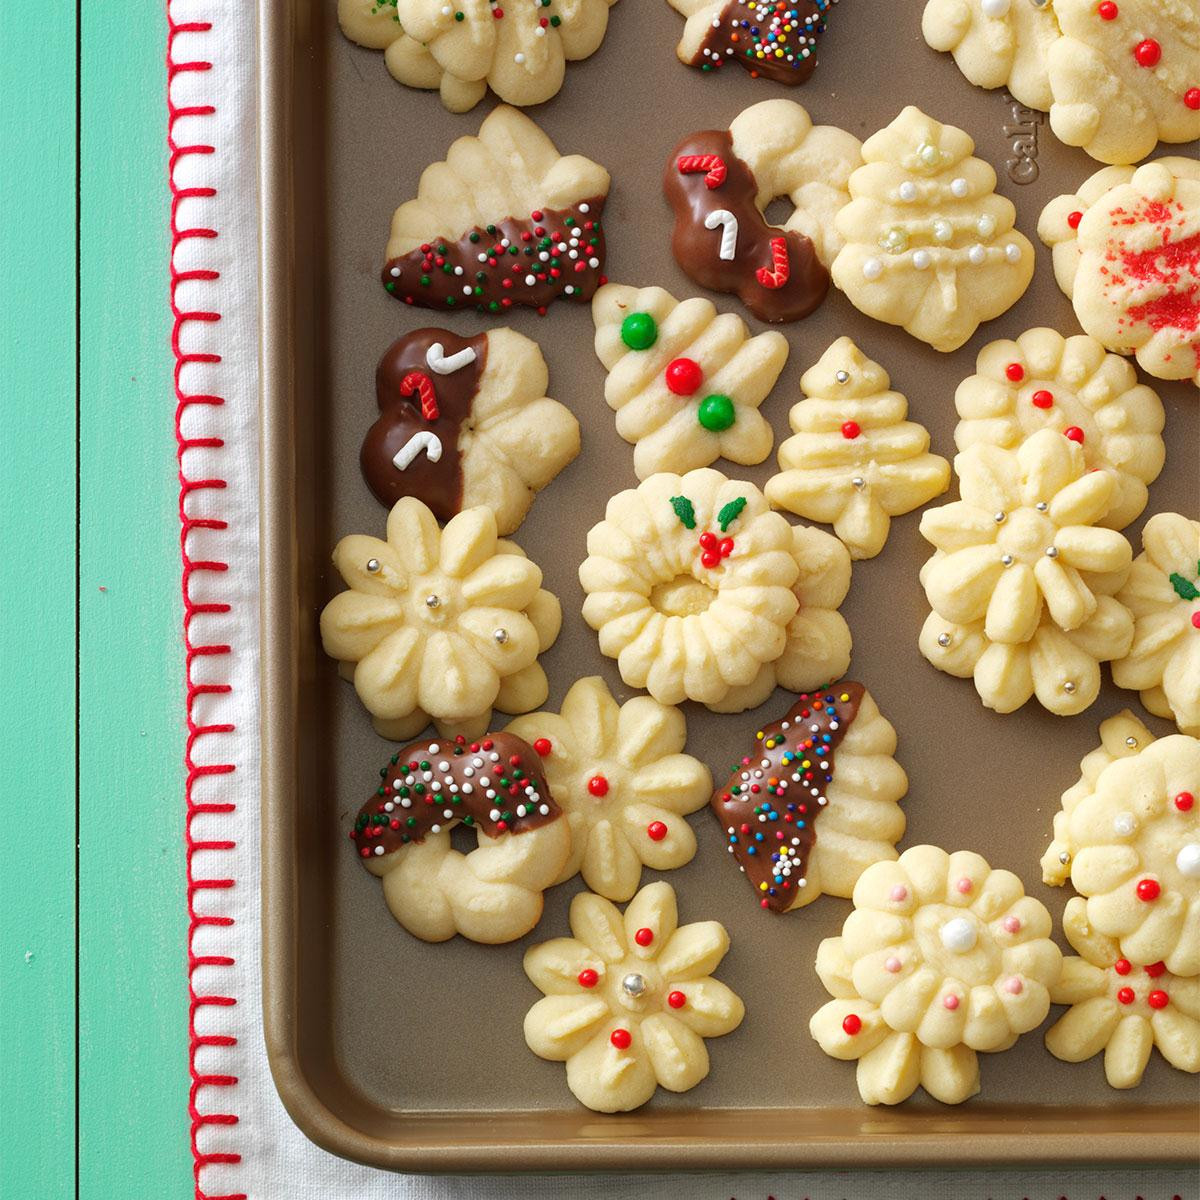 Image Of Christmas Cookies
 150 of the Best Christmas Cookies Ever